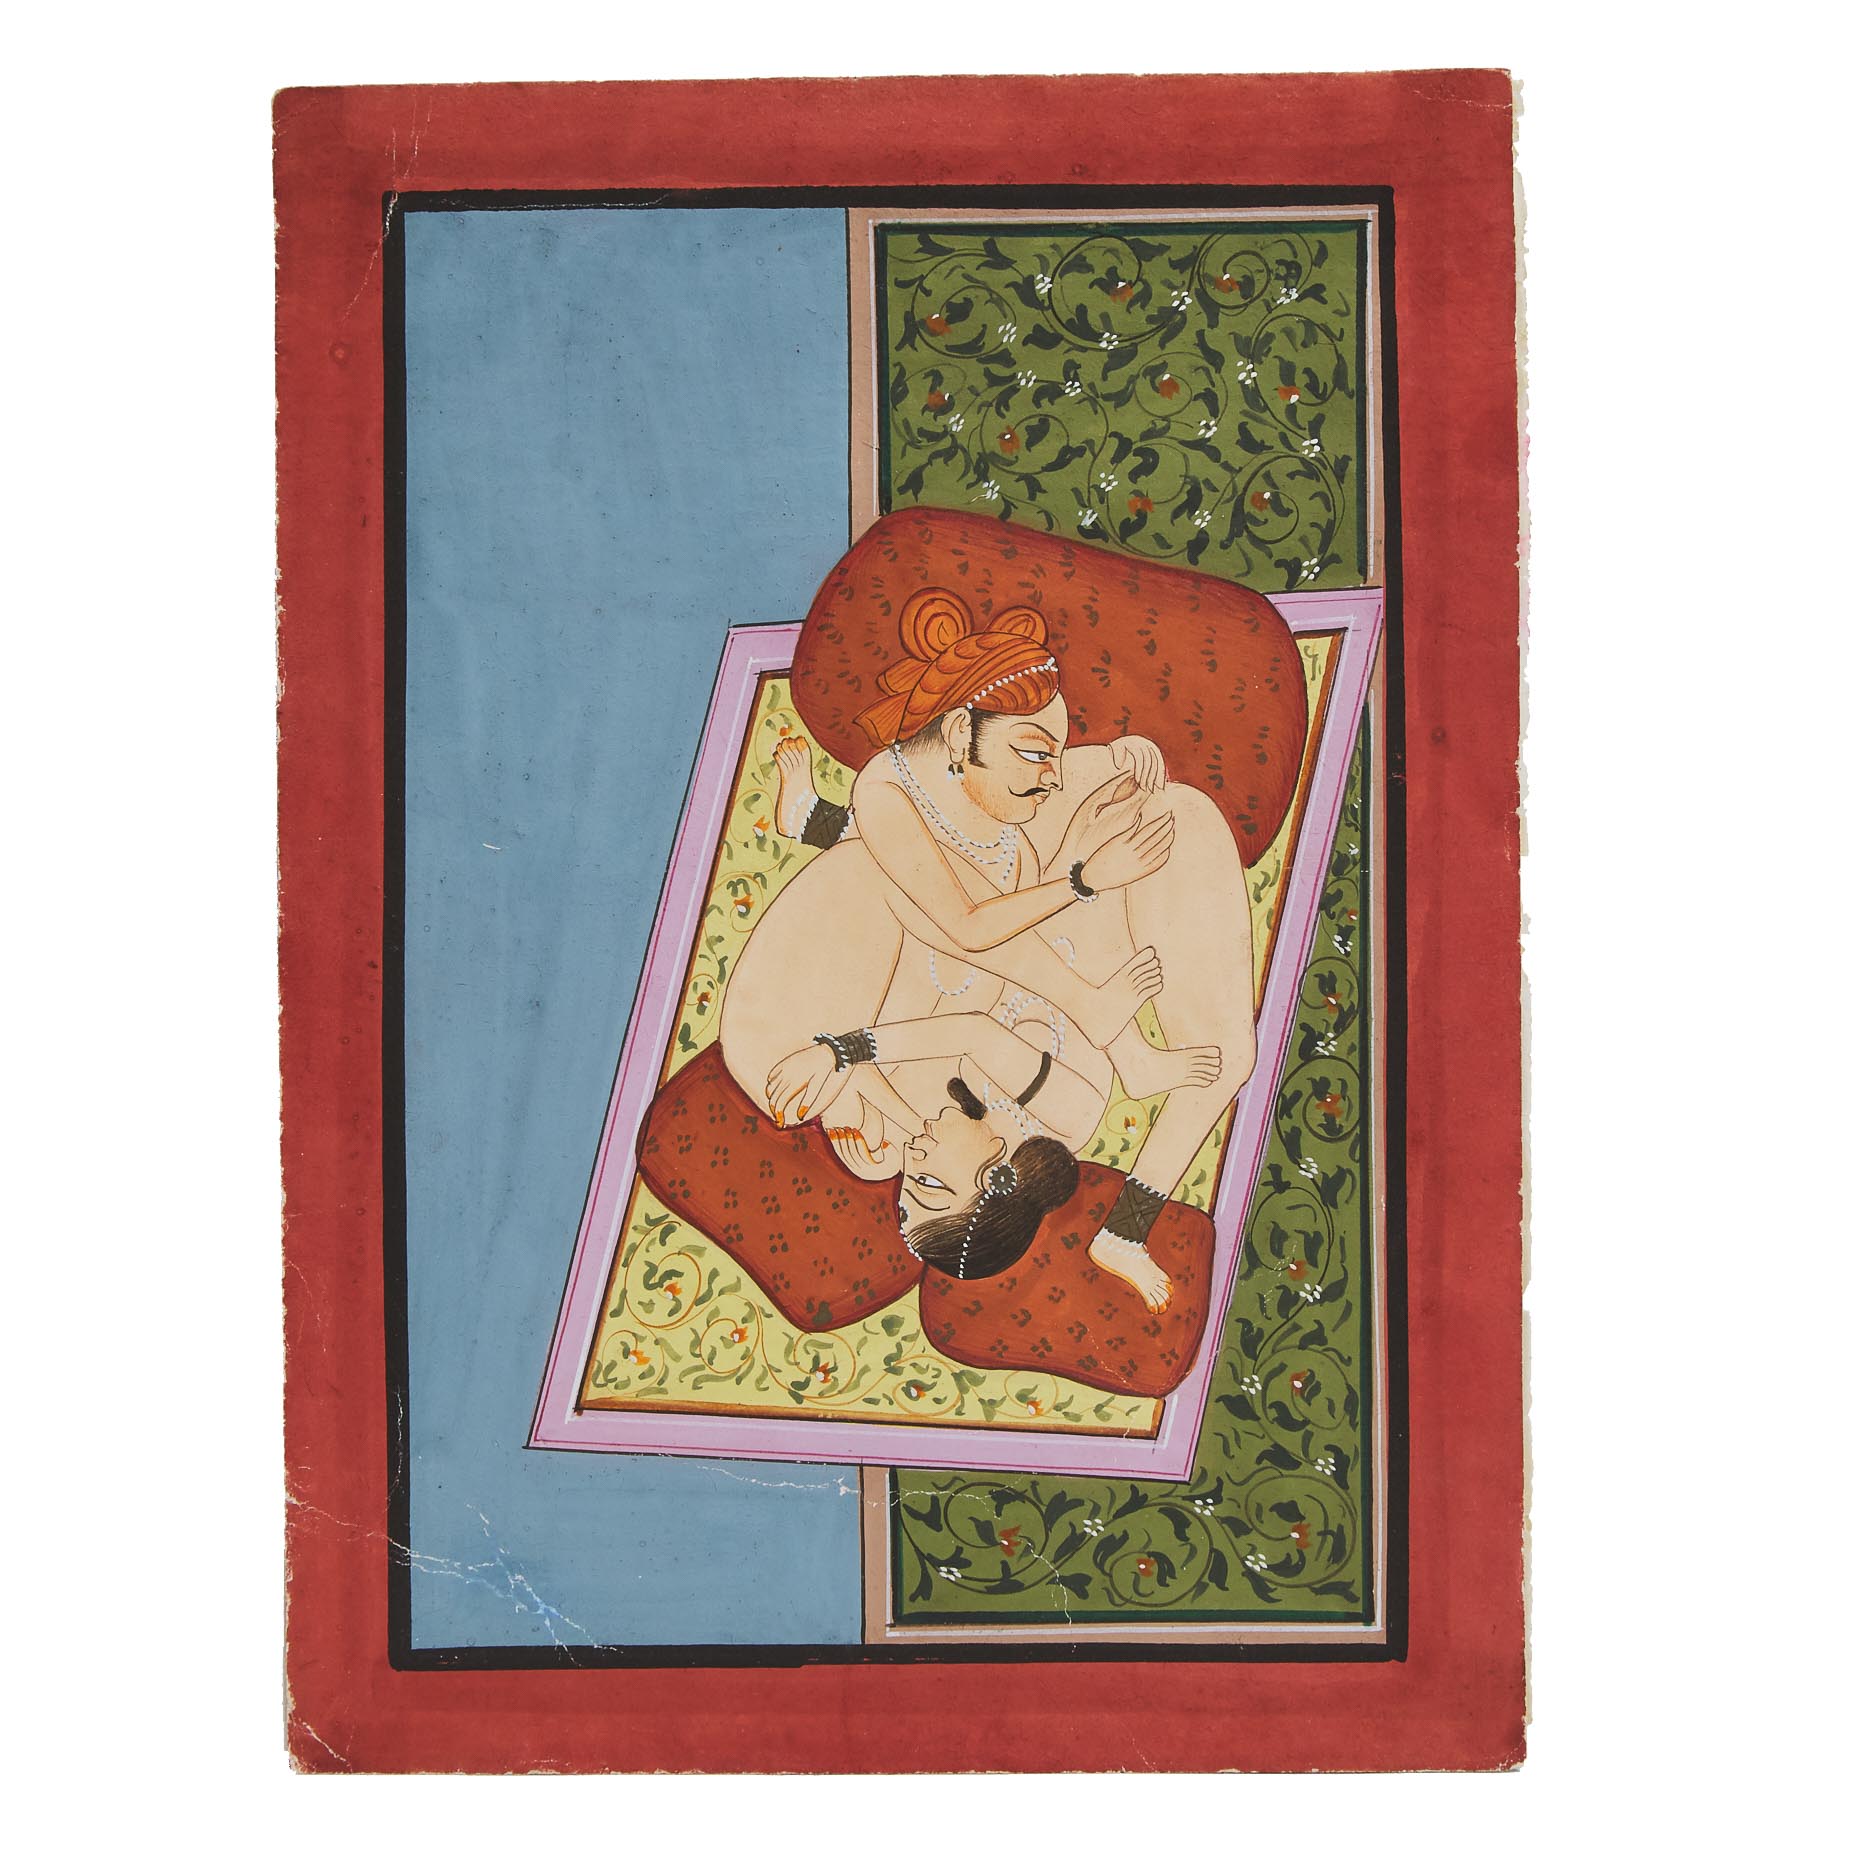 Rajasthan School, An Erotic Indian Miniature Painting, 19th Century